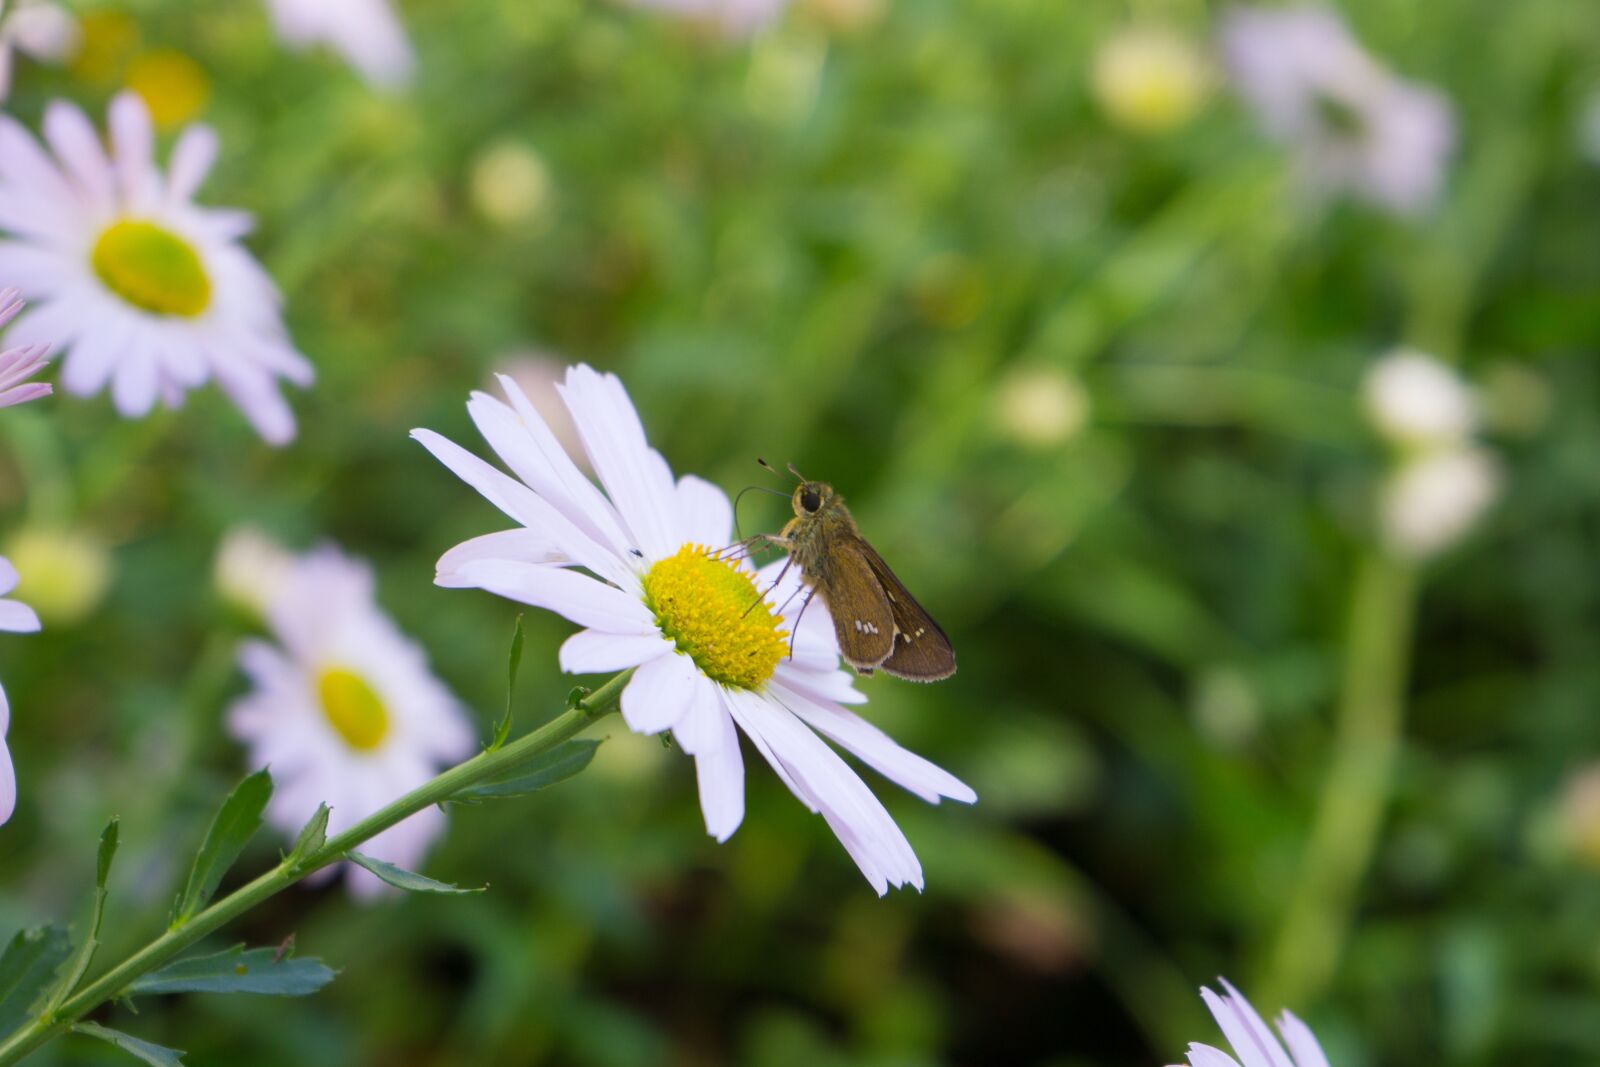 Sony a6000 sample photo. Butterfly, flowers, nature photography